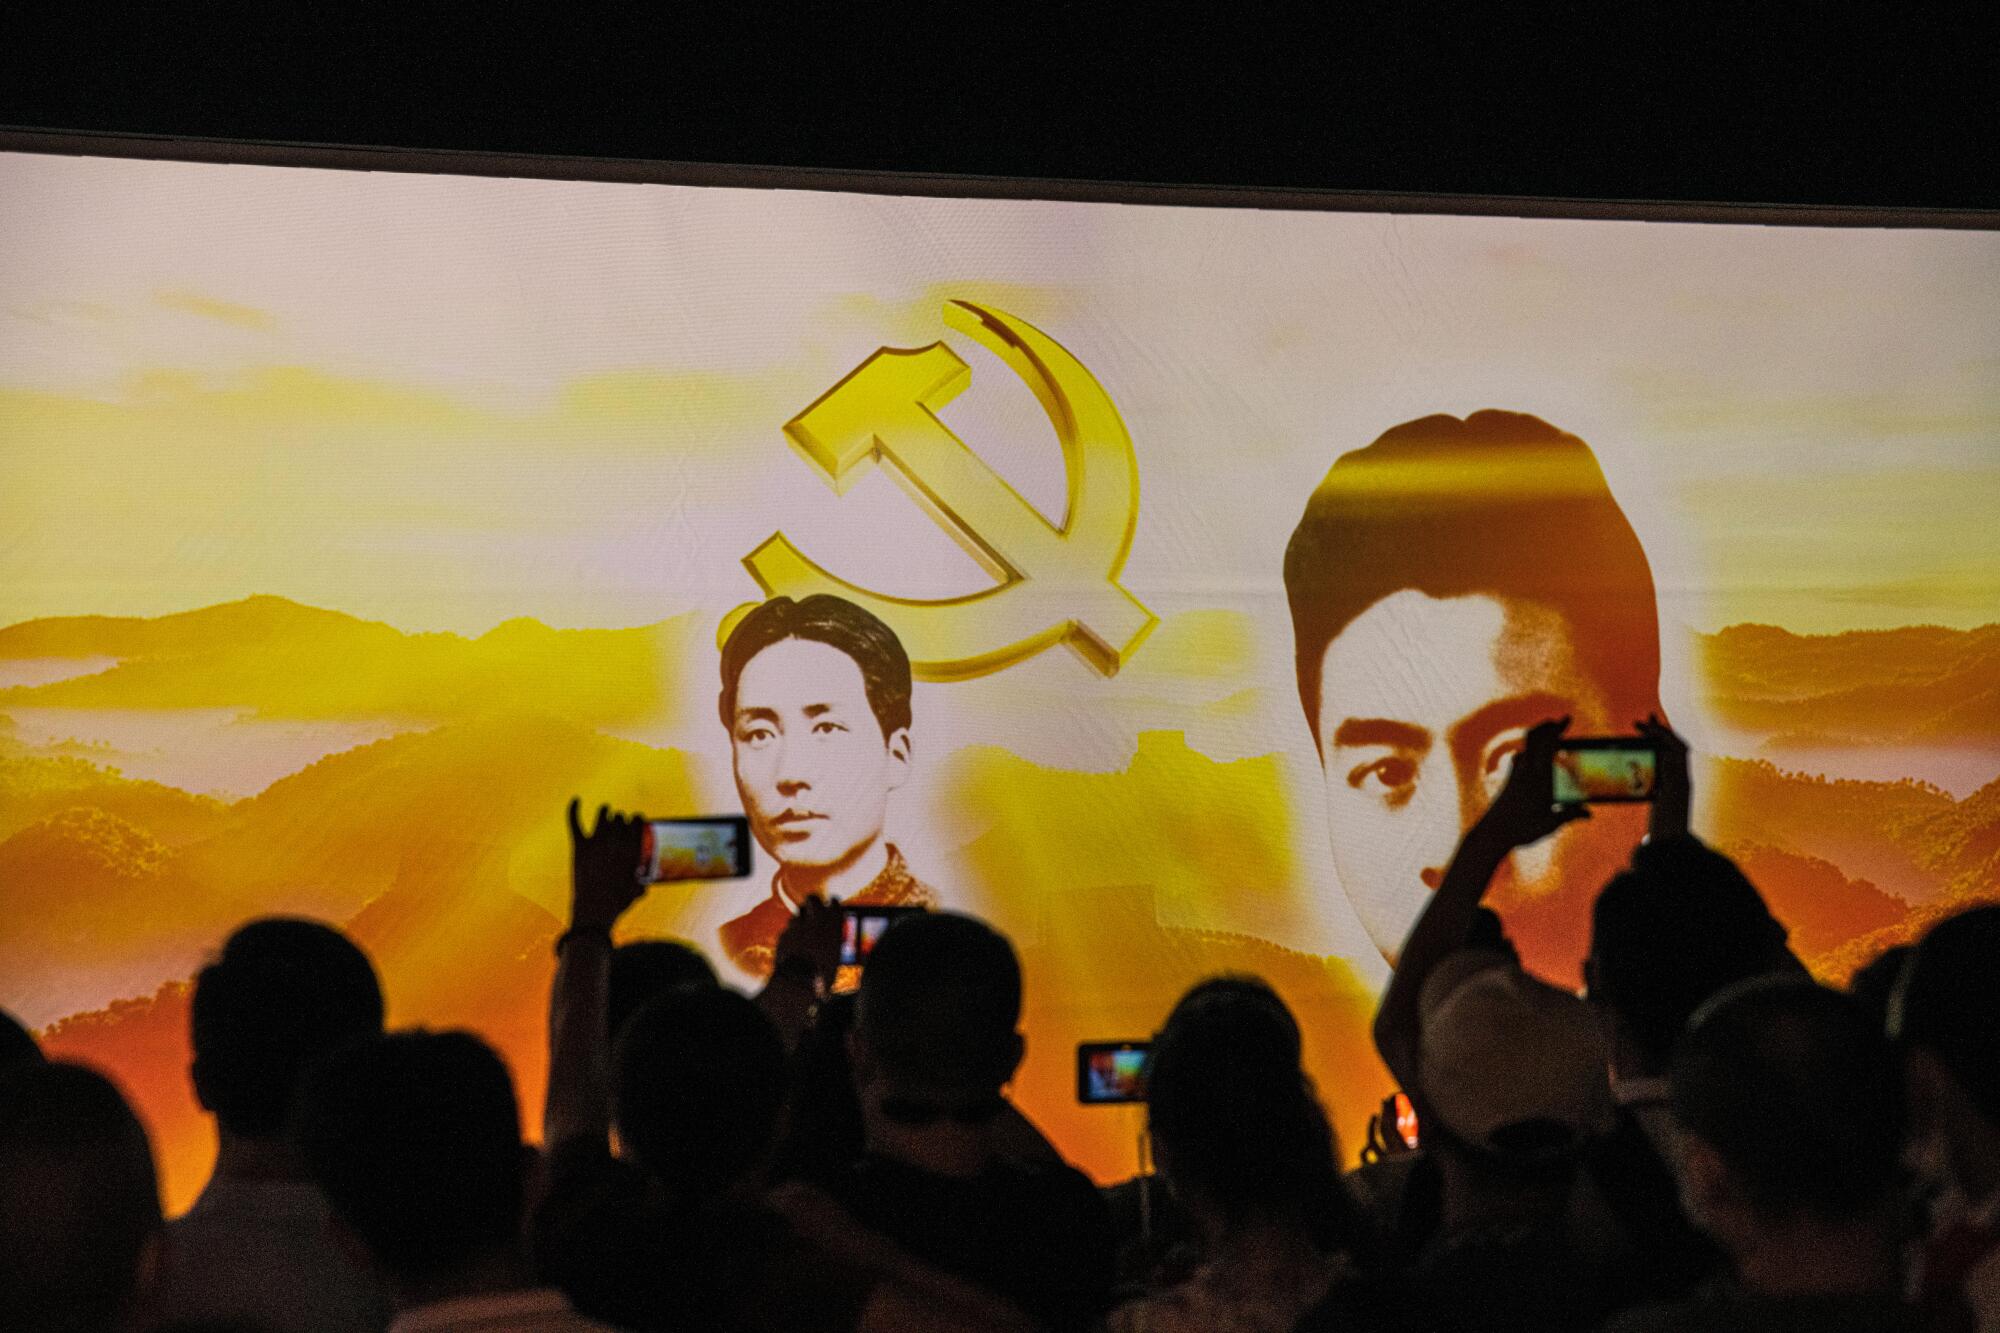 People hold up cellphones to record images of two men on screen, with a hammer and sickle symbol in the background 